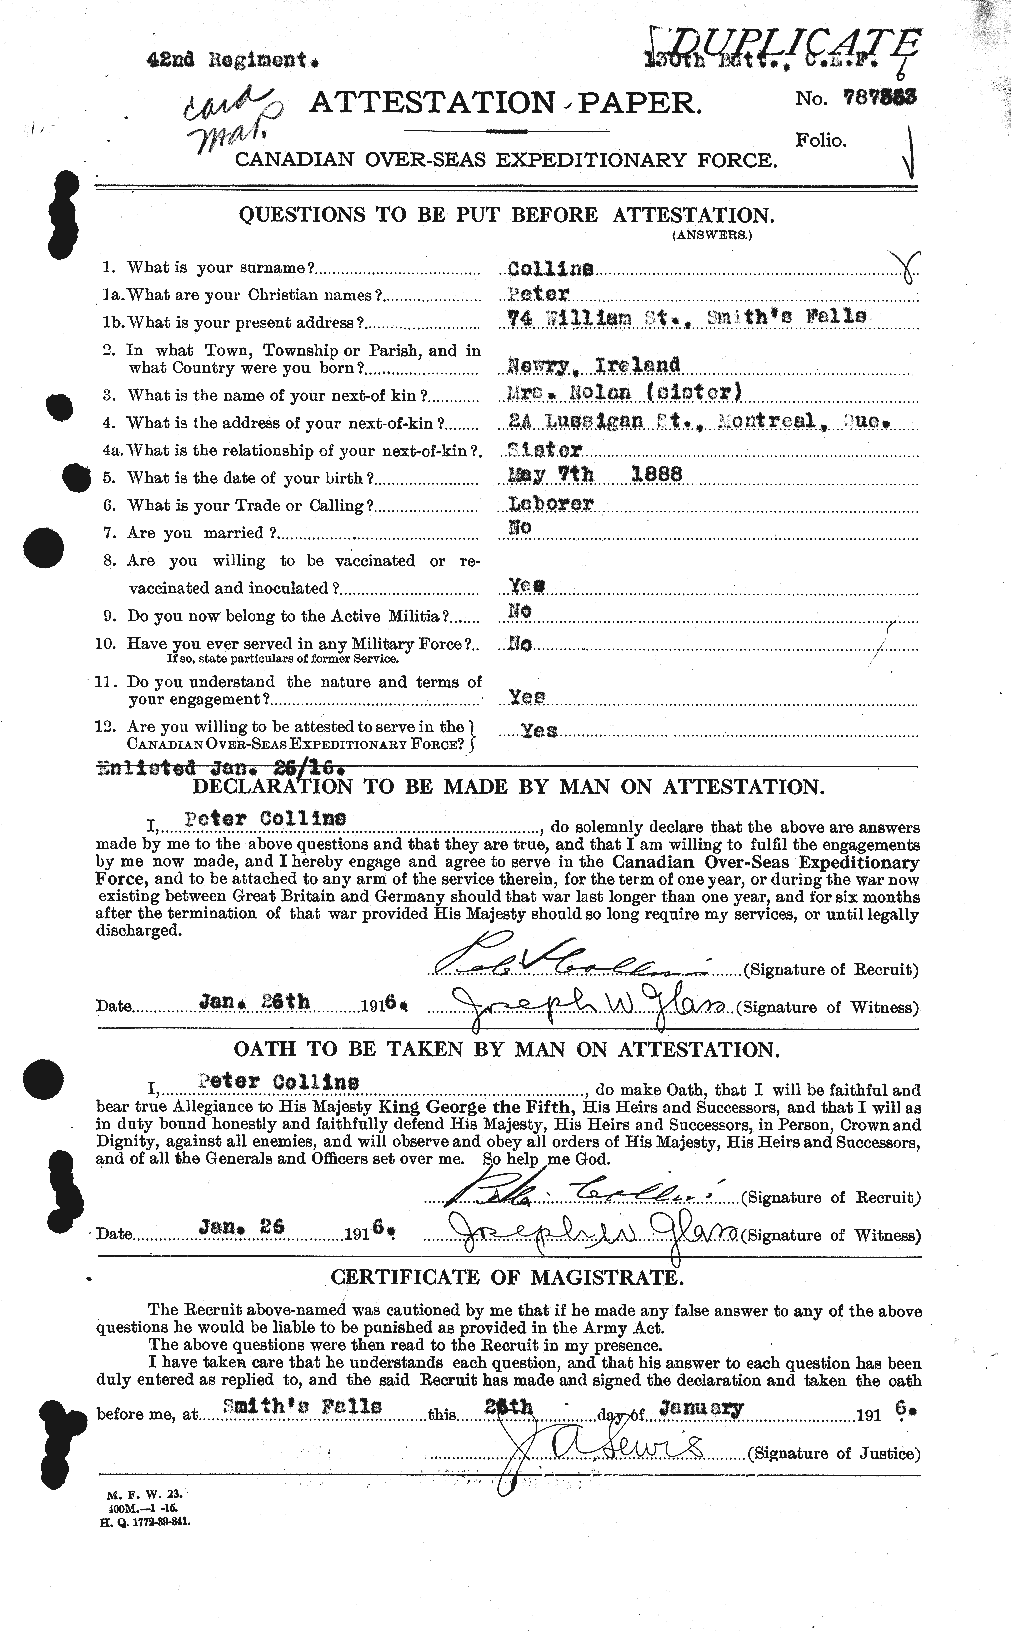 Personnel Records of the First World War - CEF 069293a